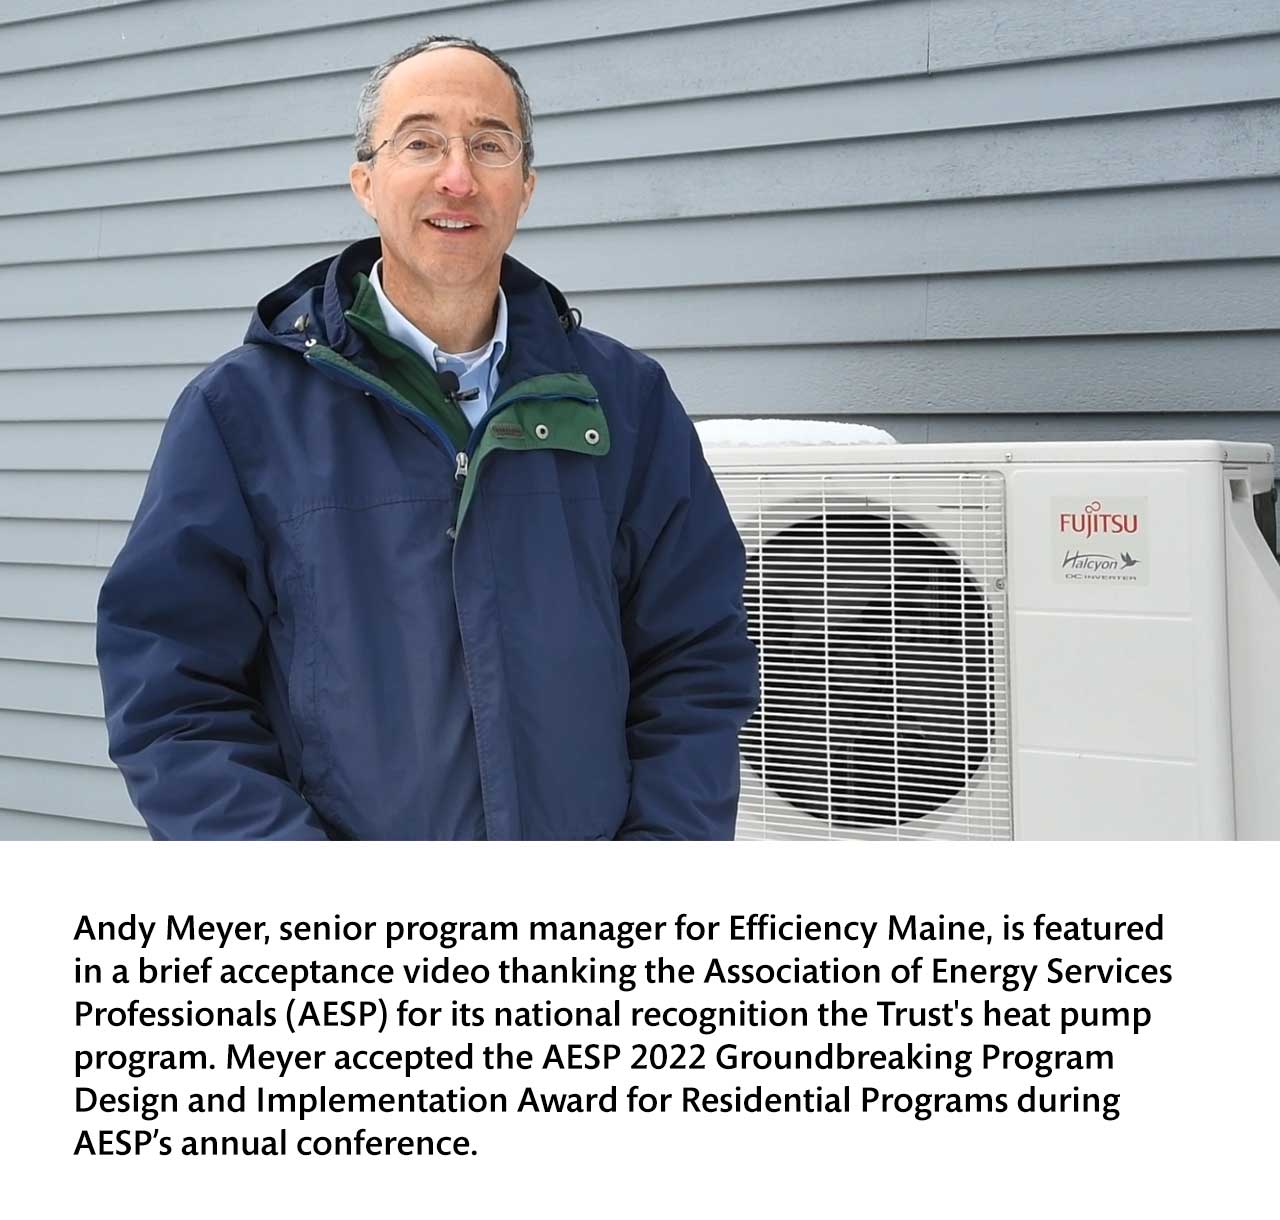 Efficiency Maine’s Residential Heat Pump Initiative is Labeled “Groundbreaking” by the Association of Energy Services Professionals